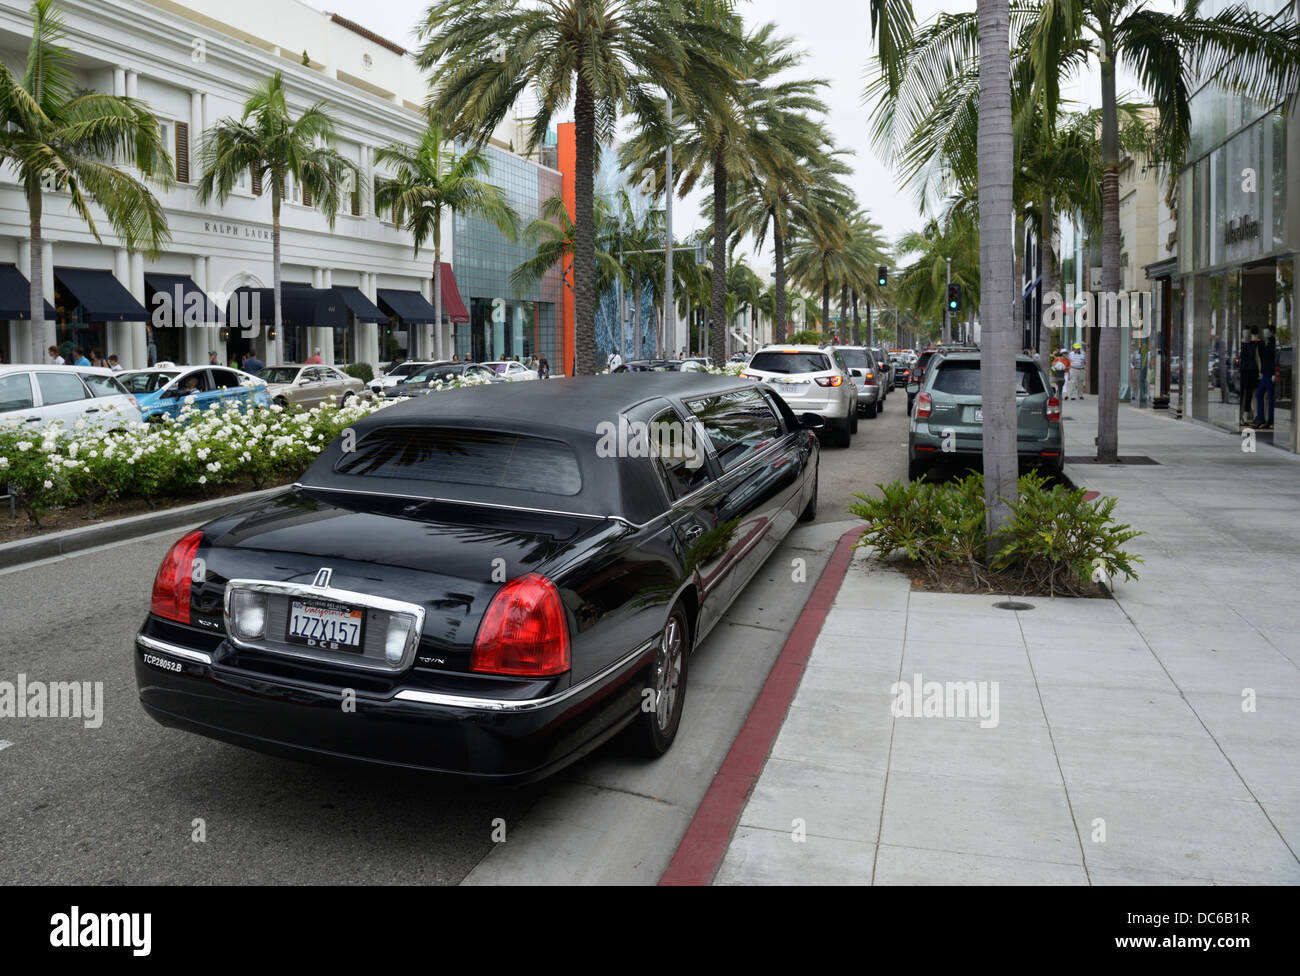 Limousine, Rodeo Drive, Beverly Hills, CA Foto Stock